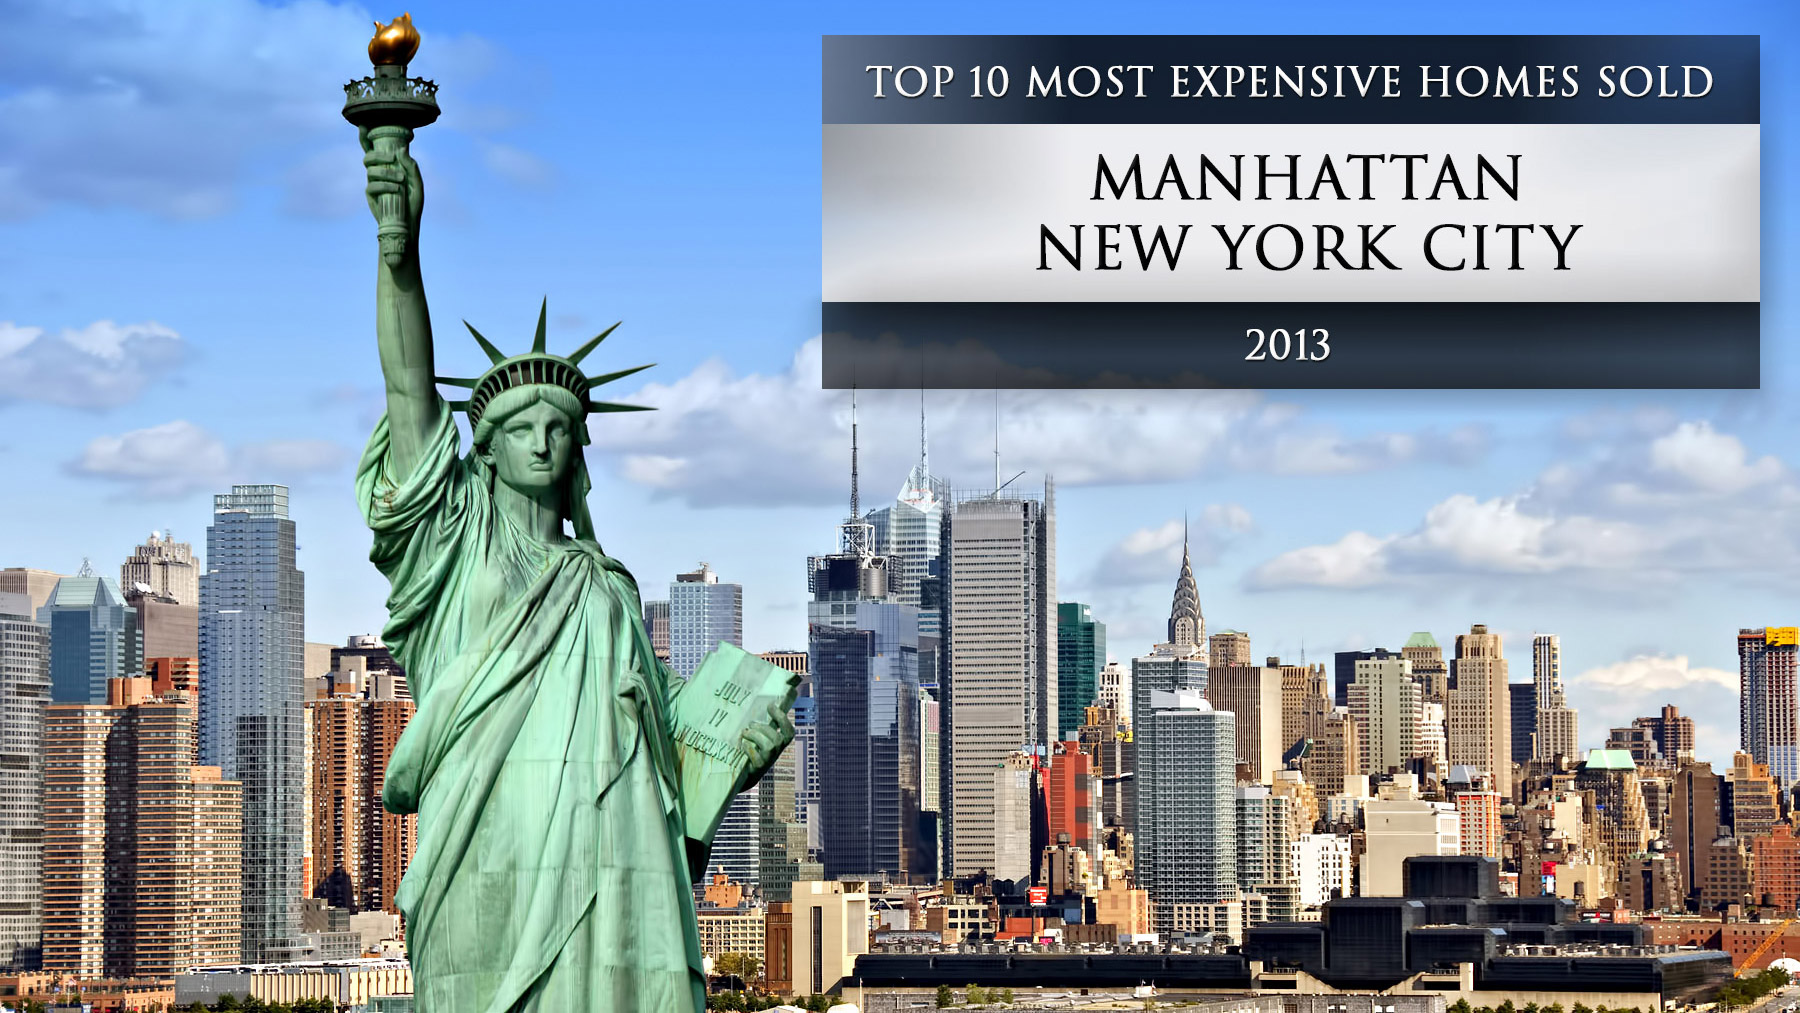 10 of the Most Expensive Manhattan, New York City Homes Sold in 2013